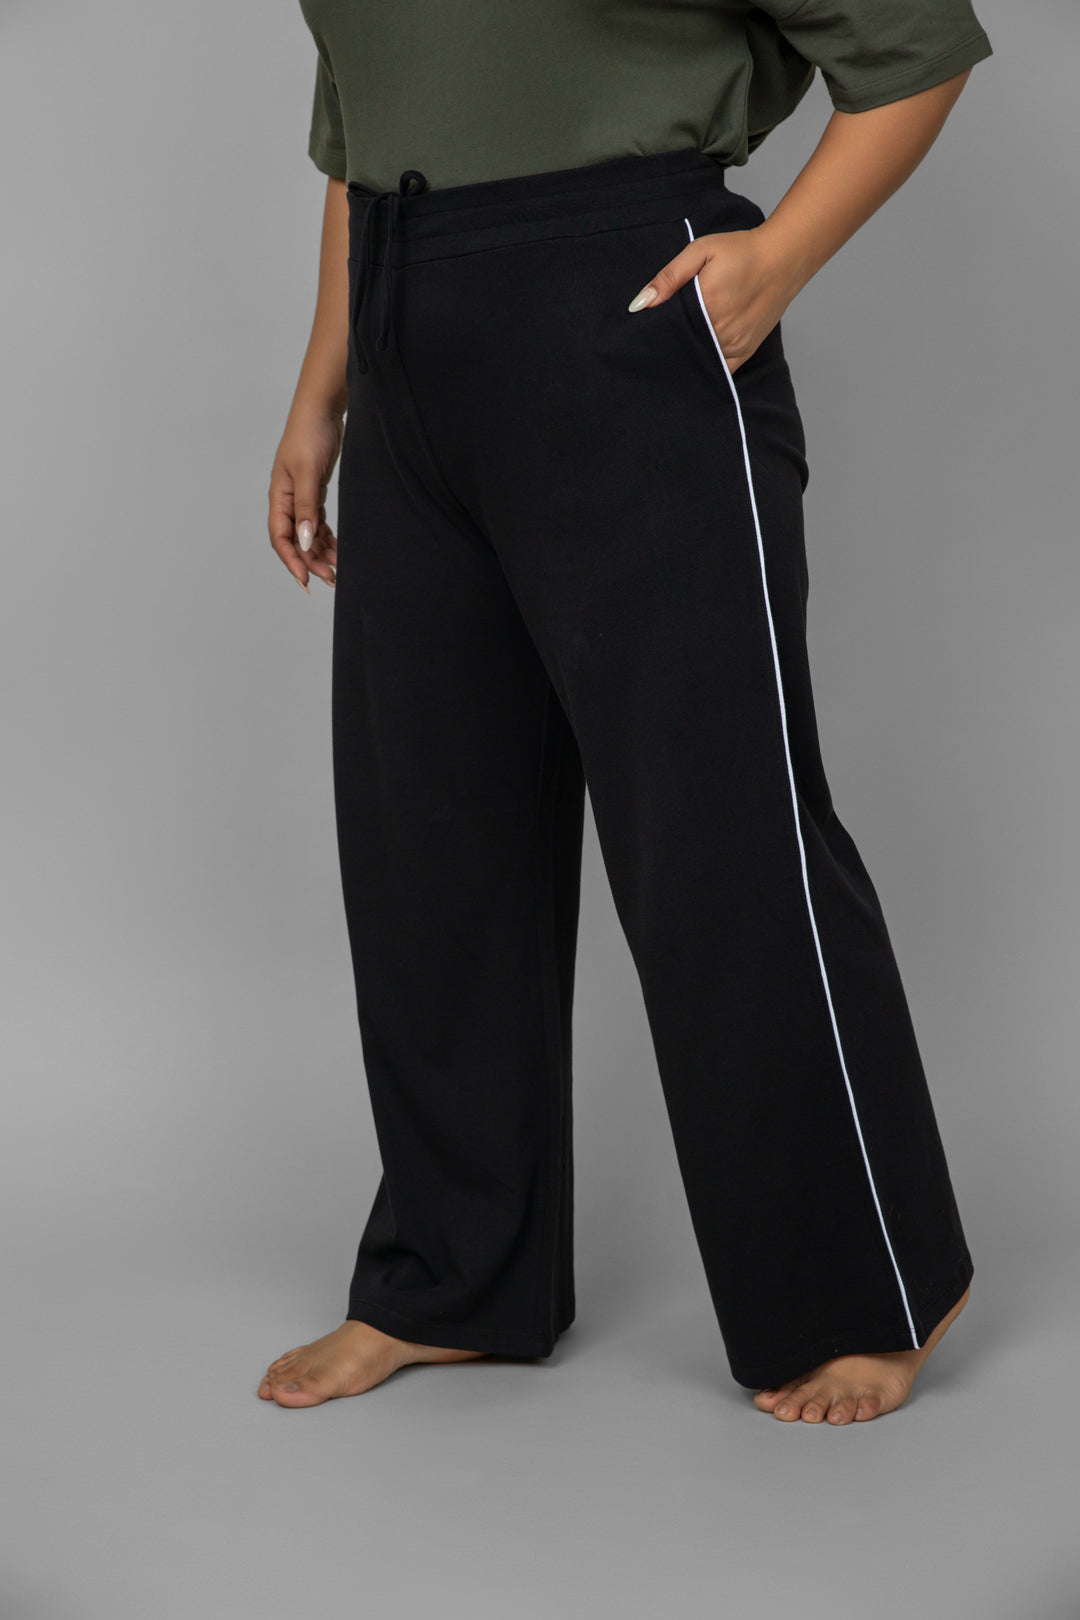 Black Contrast Piping Pants